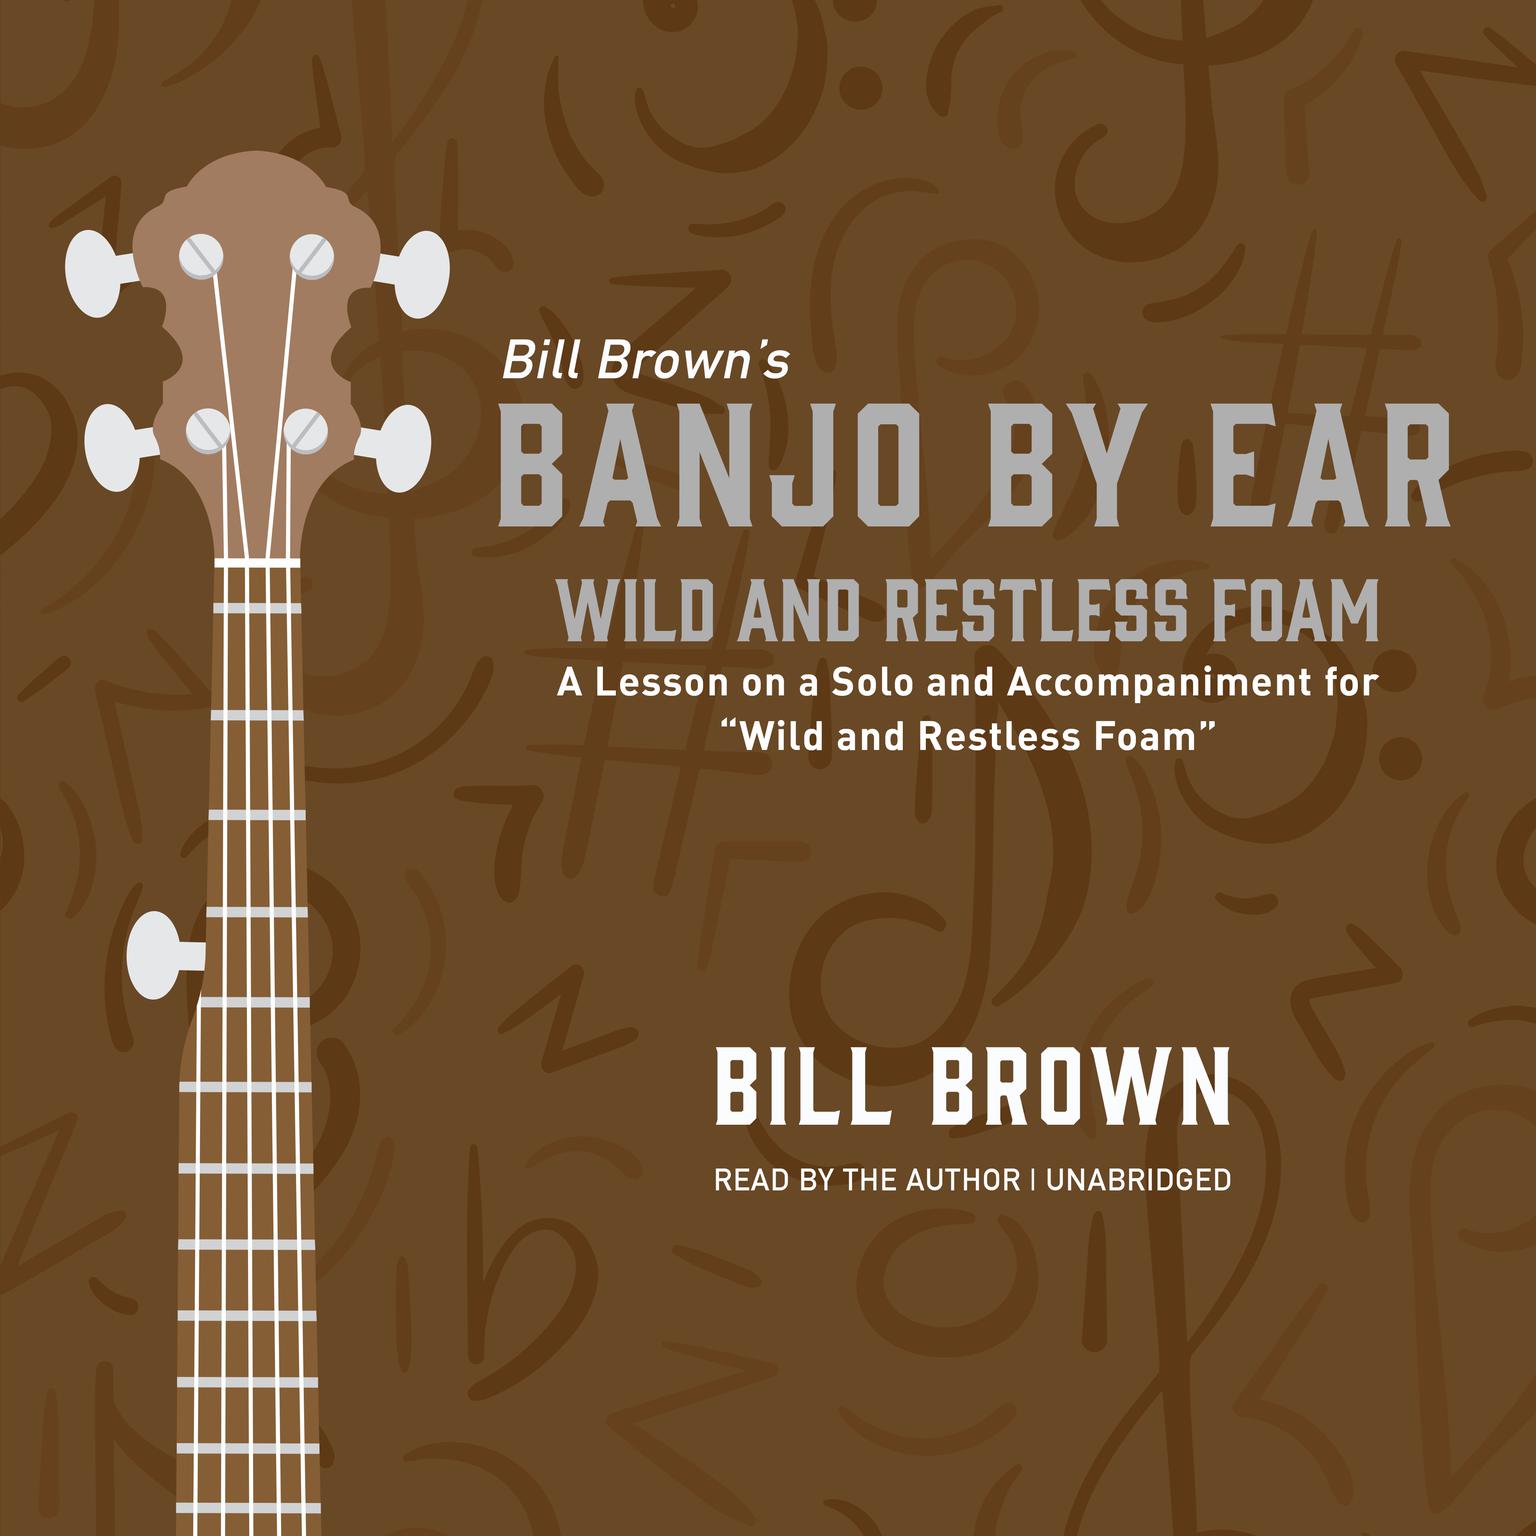 Wild and Restless Foam: A Lesson on a Solo and Accompaniment for “Wild and Restless Foam”  Audiobook, by Bill Brown